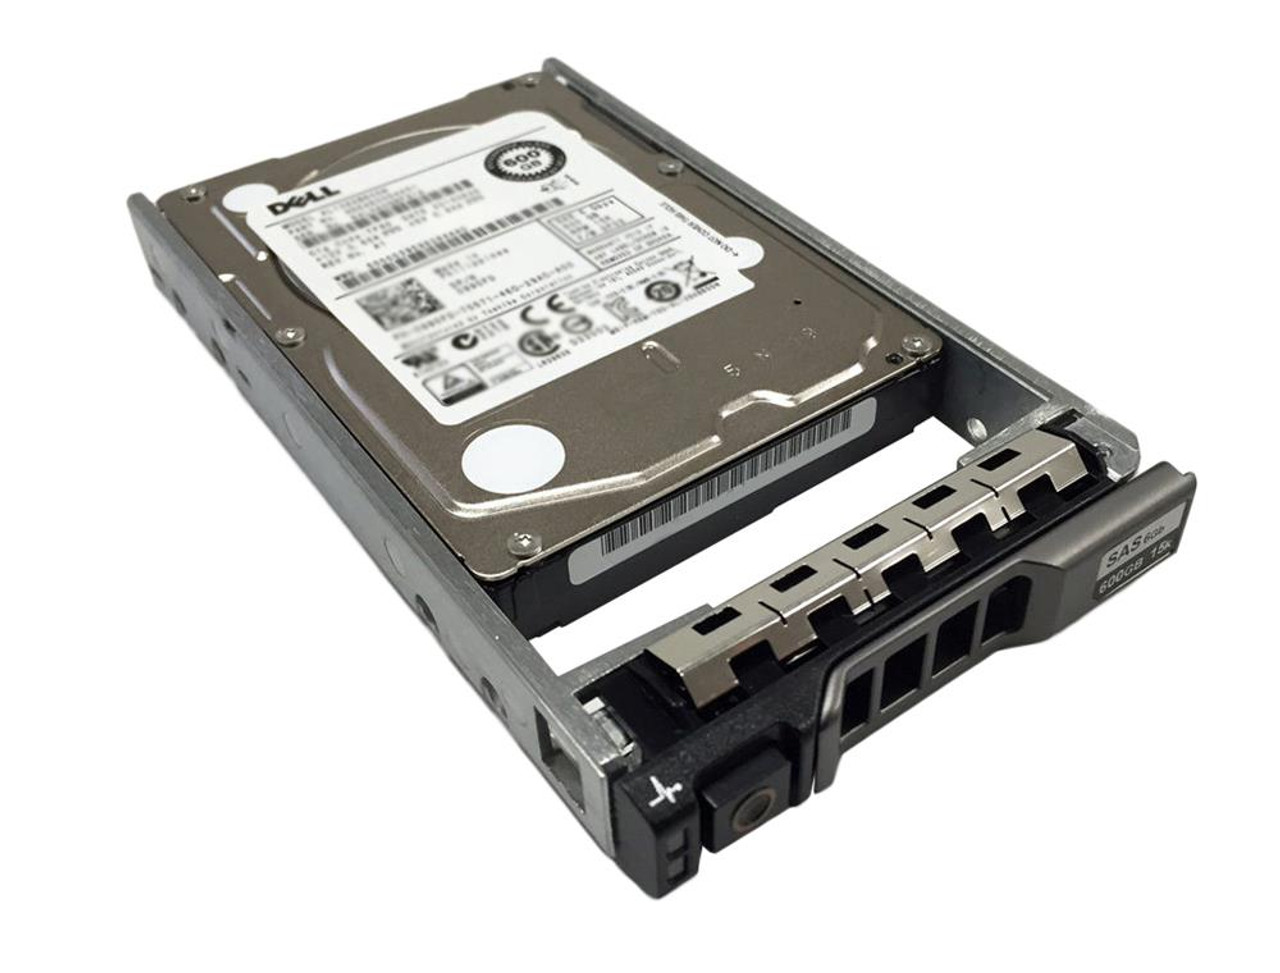 400-AJSB Dell 600GB 15000RPM SAS 12Gbps Hot Swap 2.5-inch Internal Hard Drive with Tray